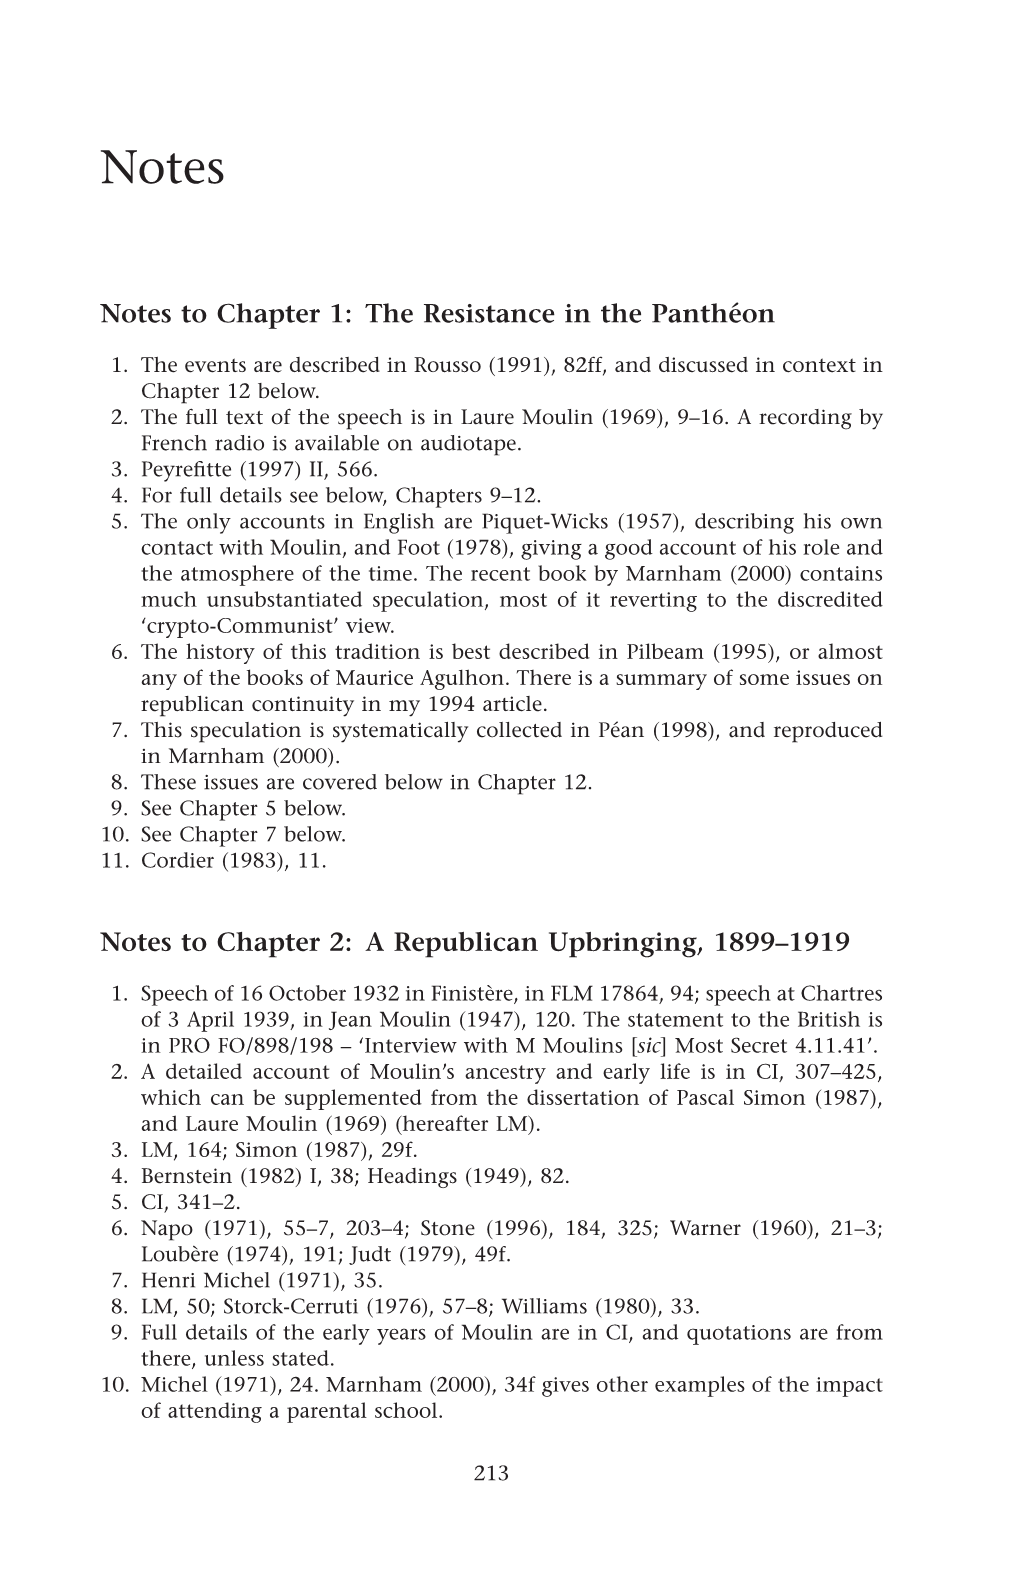 Notes to Chapter 1: the Resistance in the Panthéon Notes to Chapter 2: A